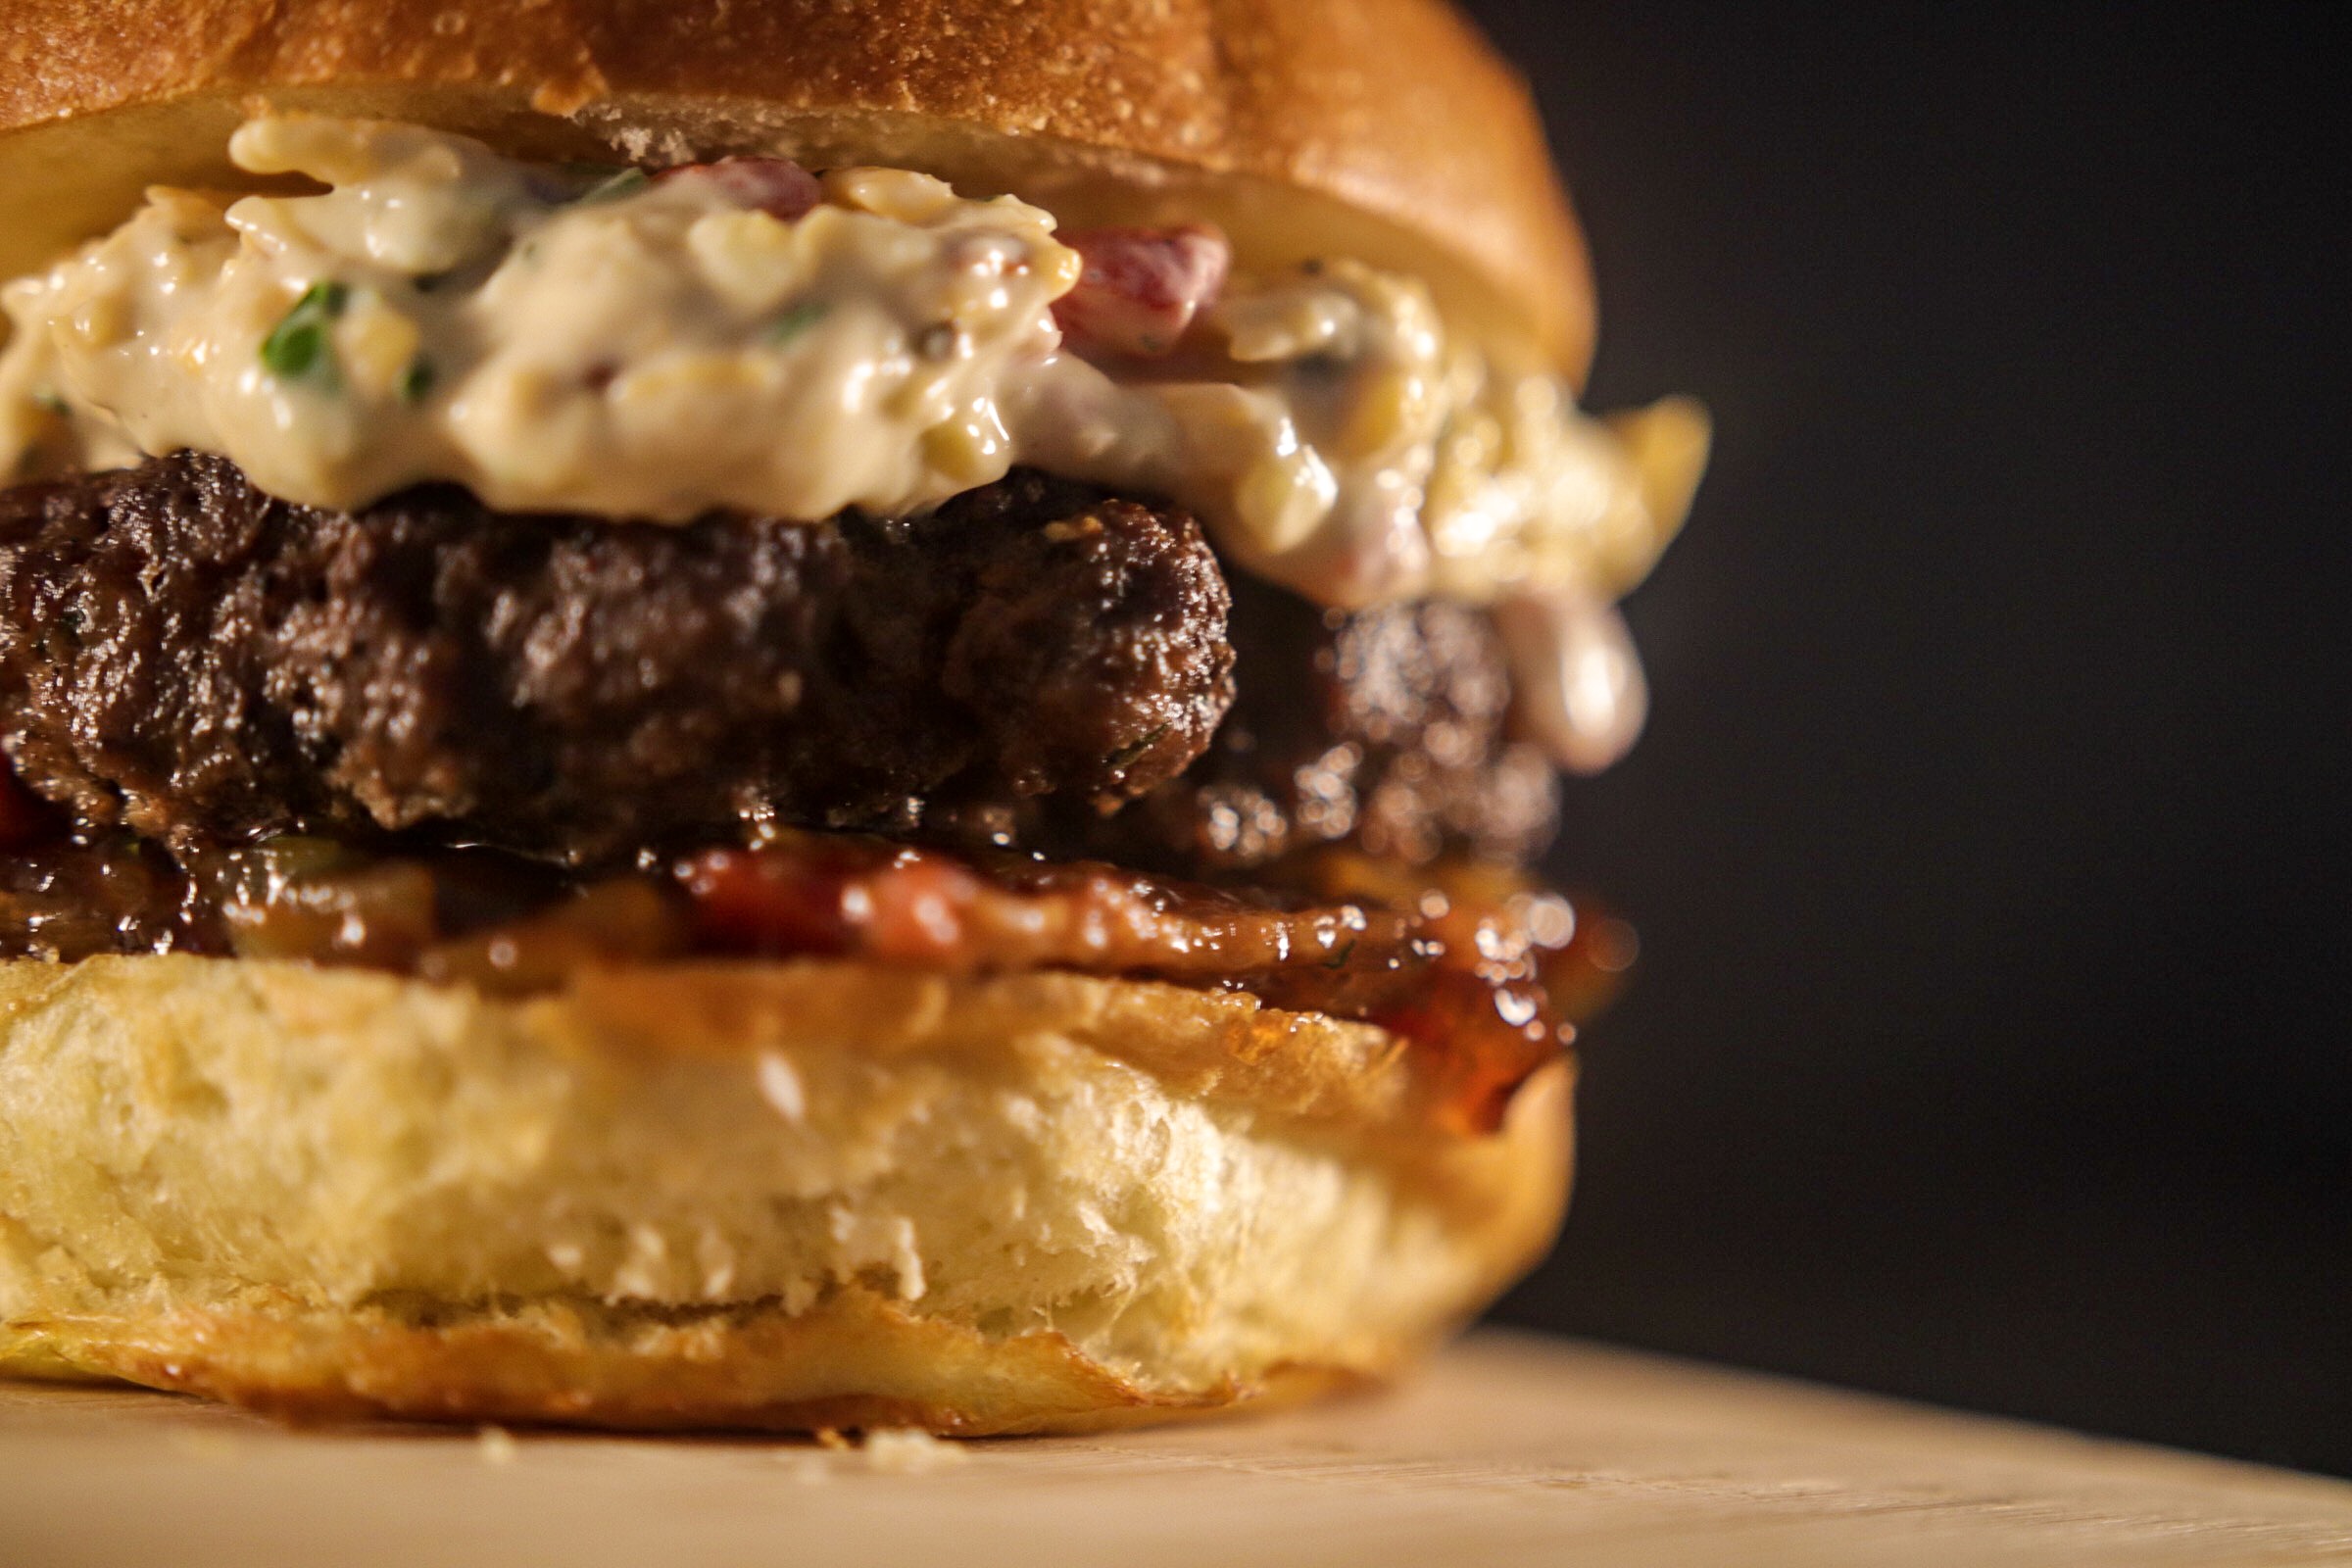 Where To Find The Best Cheeseburgers In These Major Cities